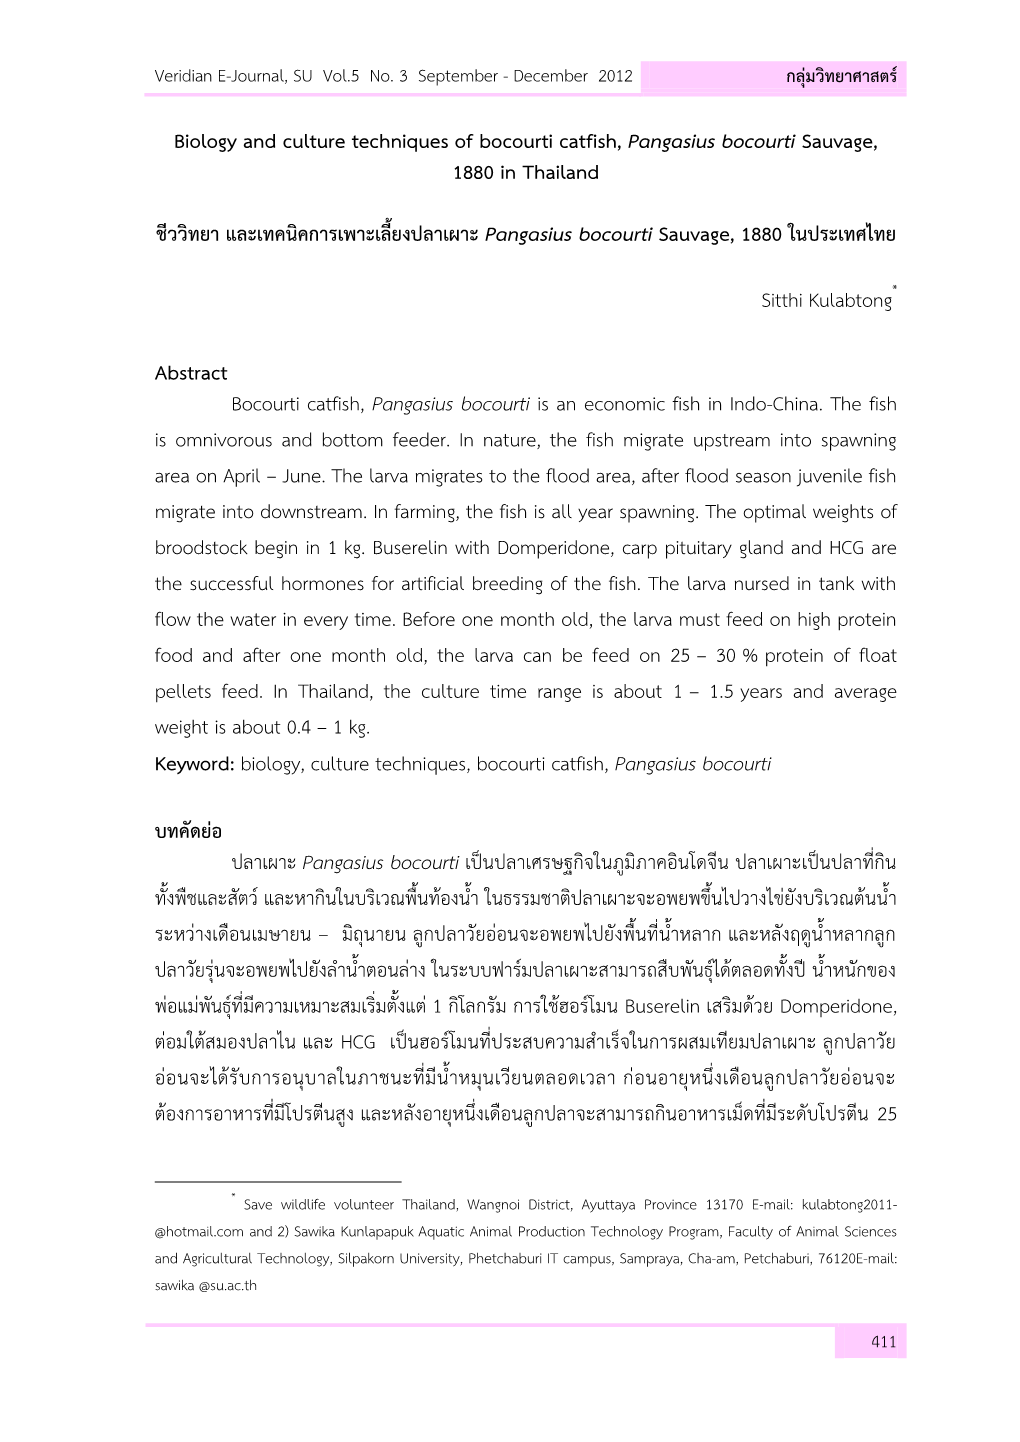 Biology and Culture Techniques of Bocourti Catfish, Pangasius Bocourti Sauvage, 1880 in Thailand